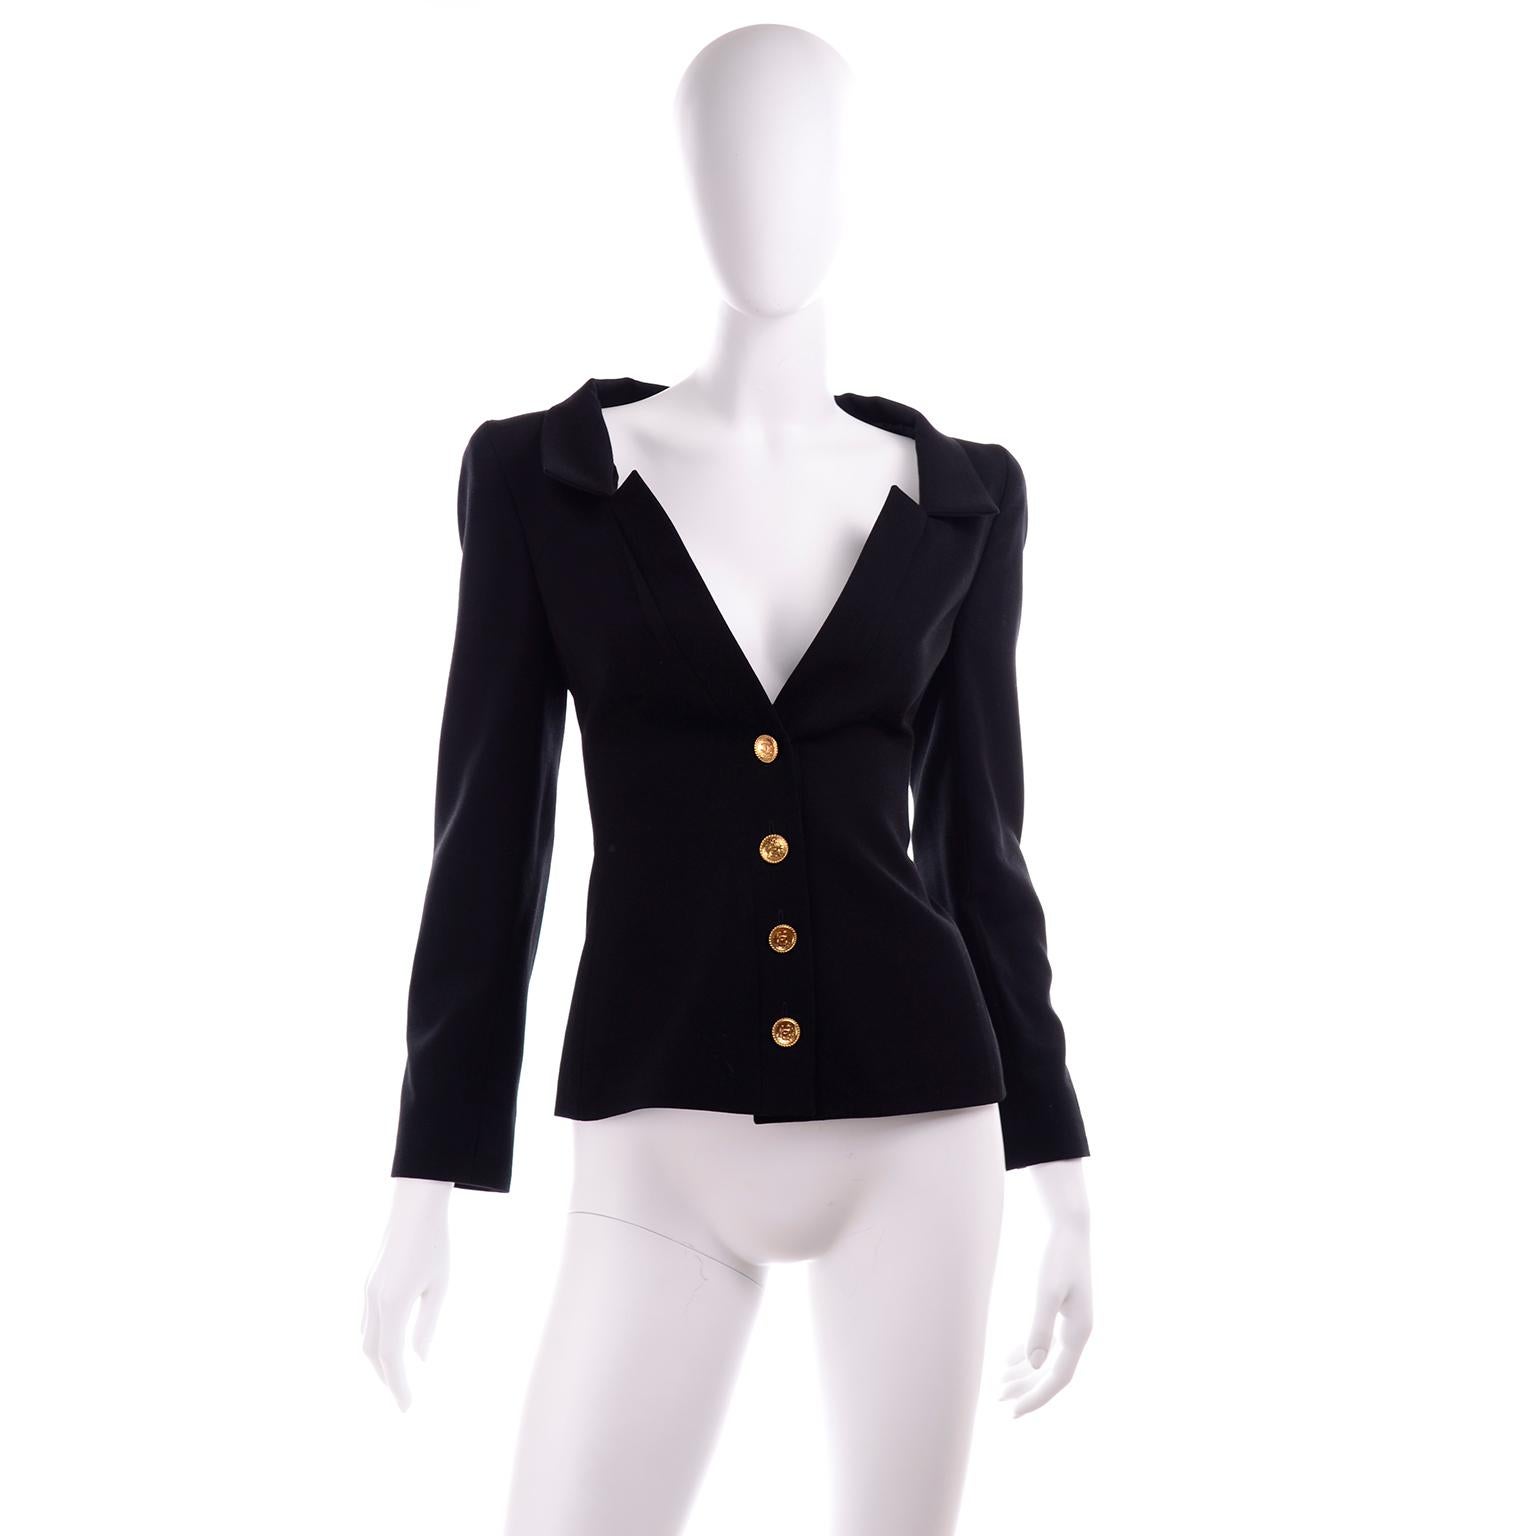 This is a fabulous black wool Chanel blazer from the Spring Summer 2001 collection.  The jacket is 100% wool with 100% silk lining and is labeled a size 42.  We love the cut of this piece and the interesting way the lapel is designed. There are gold